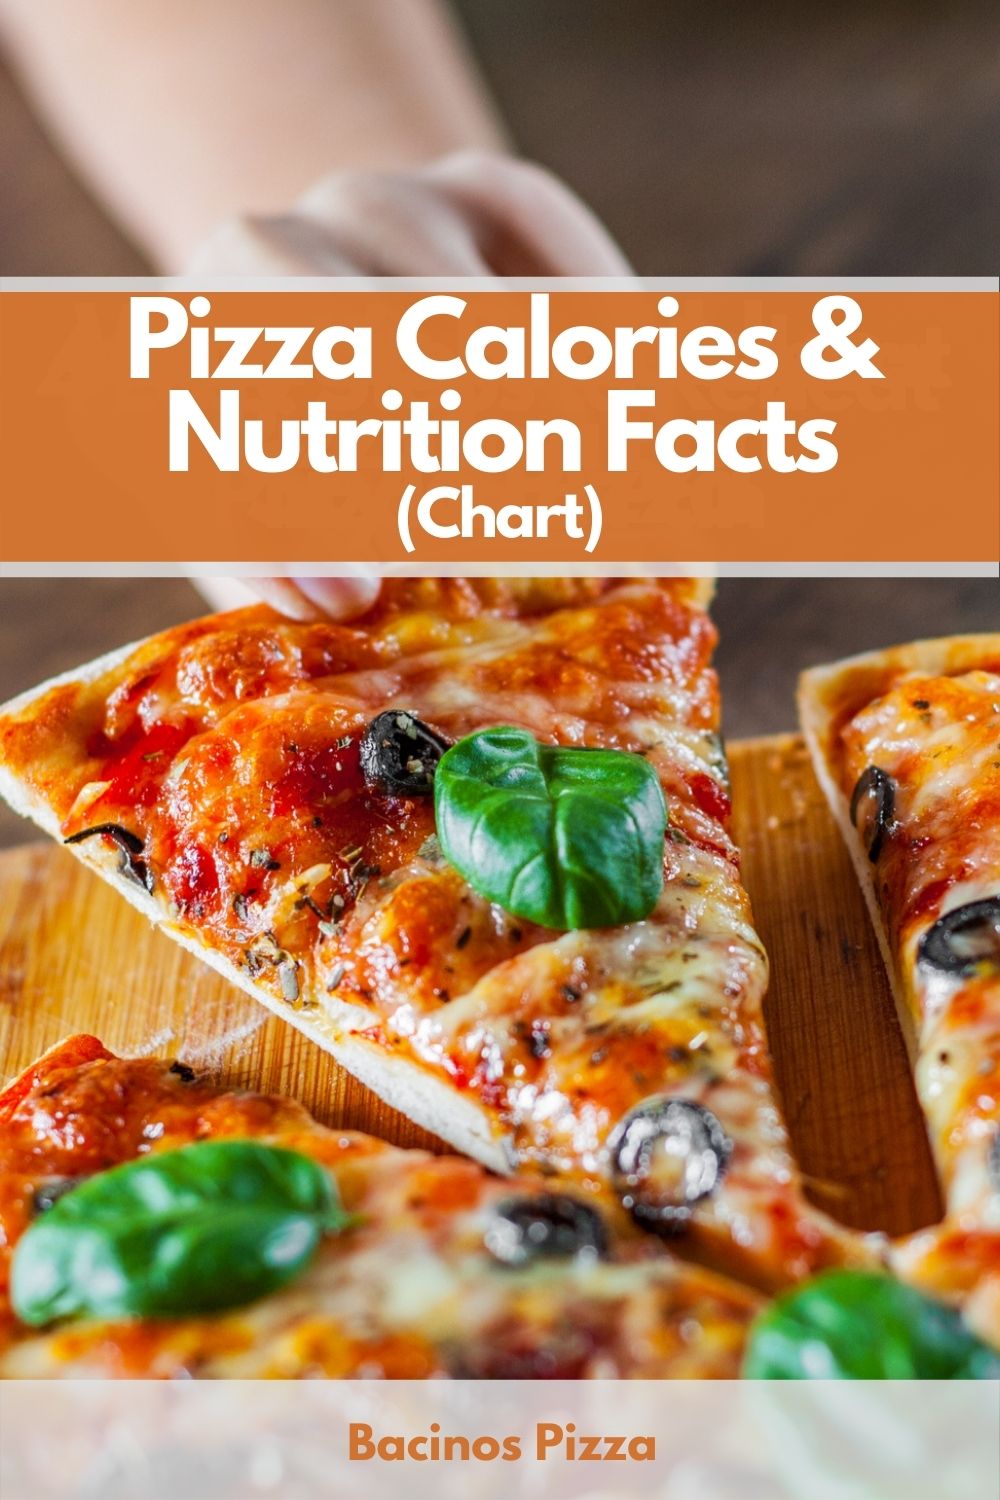 Pizza Calories & Nutrition Facts pin 2